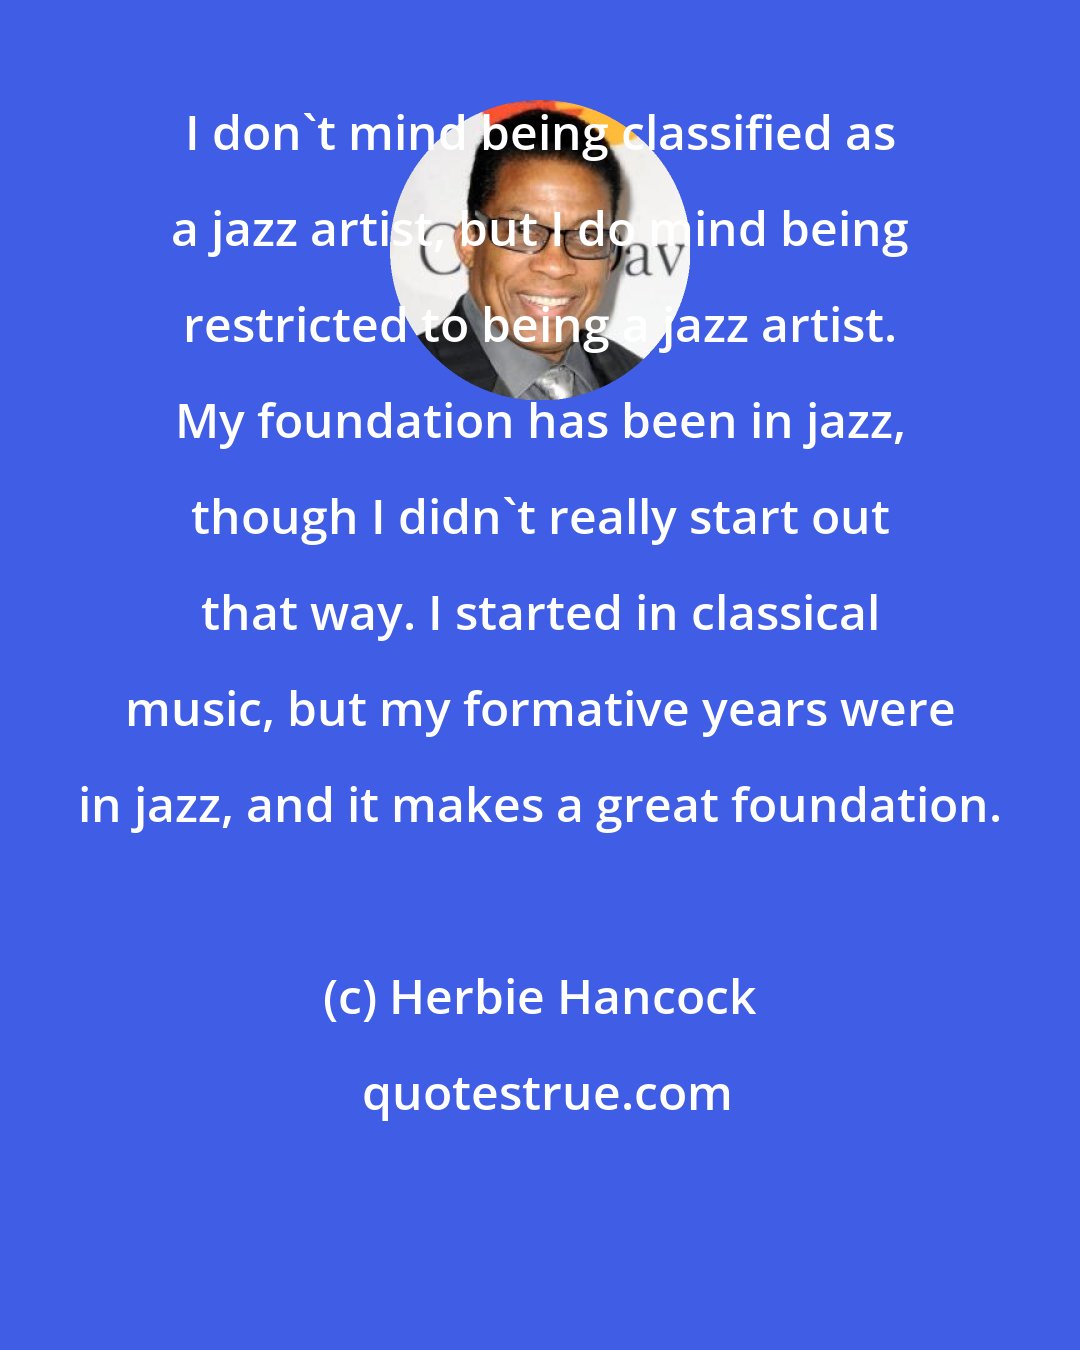 Herbie Hancock: I don't mind being classified as a jazz artist, but I do mind being restricted to being a jazz artist. My foundation has been in jazz, though I didn't really start out that way. I started in classical music, but my formative years were in jazz, and it makes a great foundation.